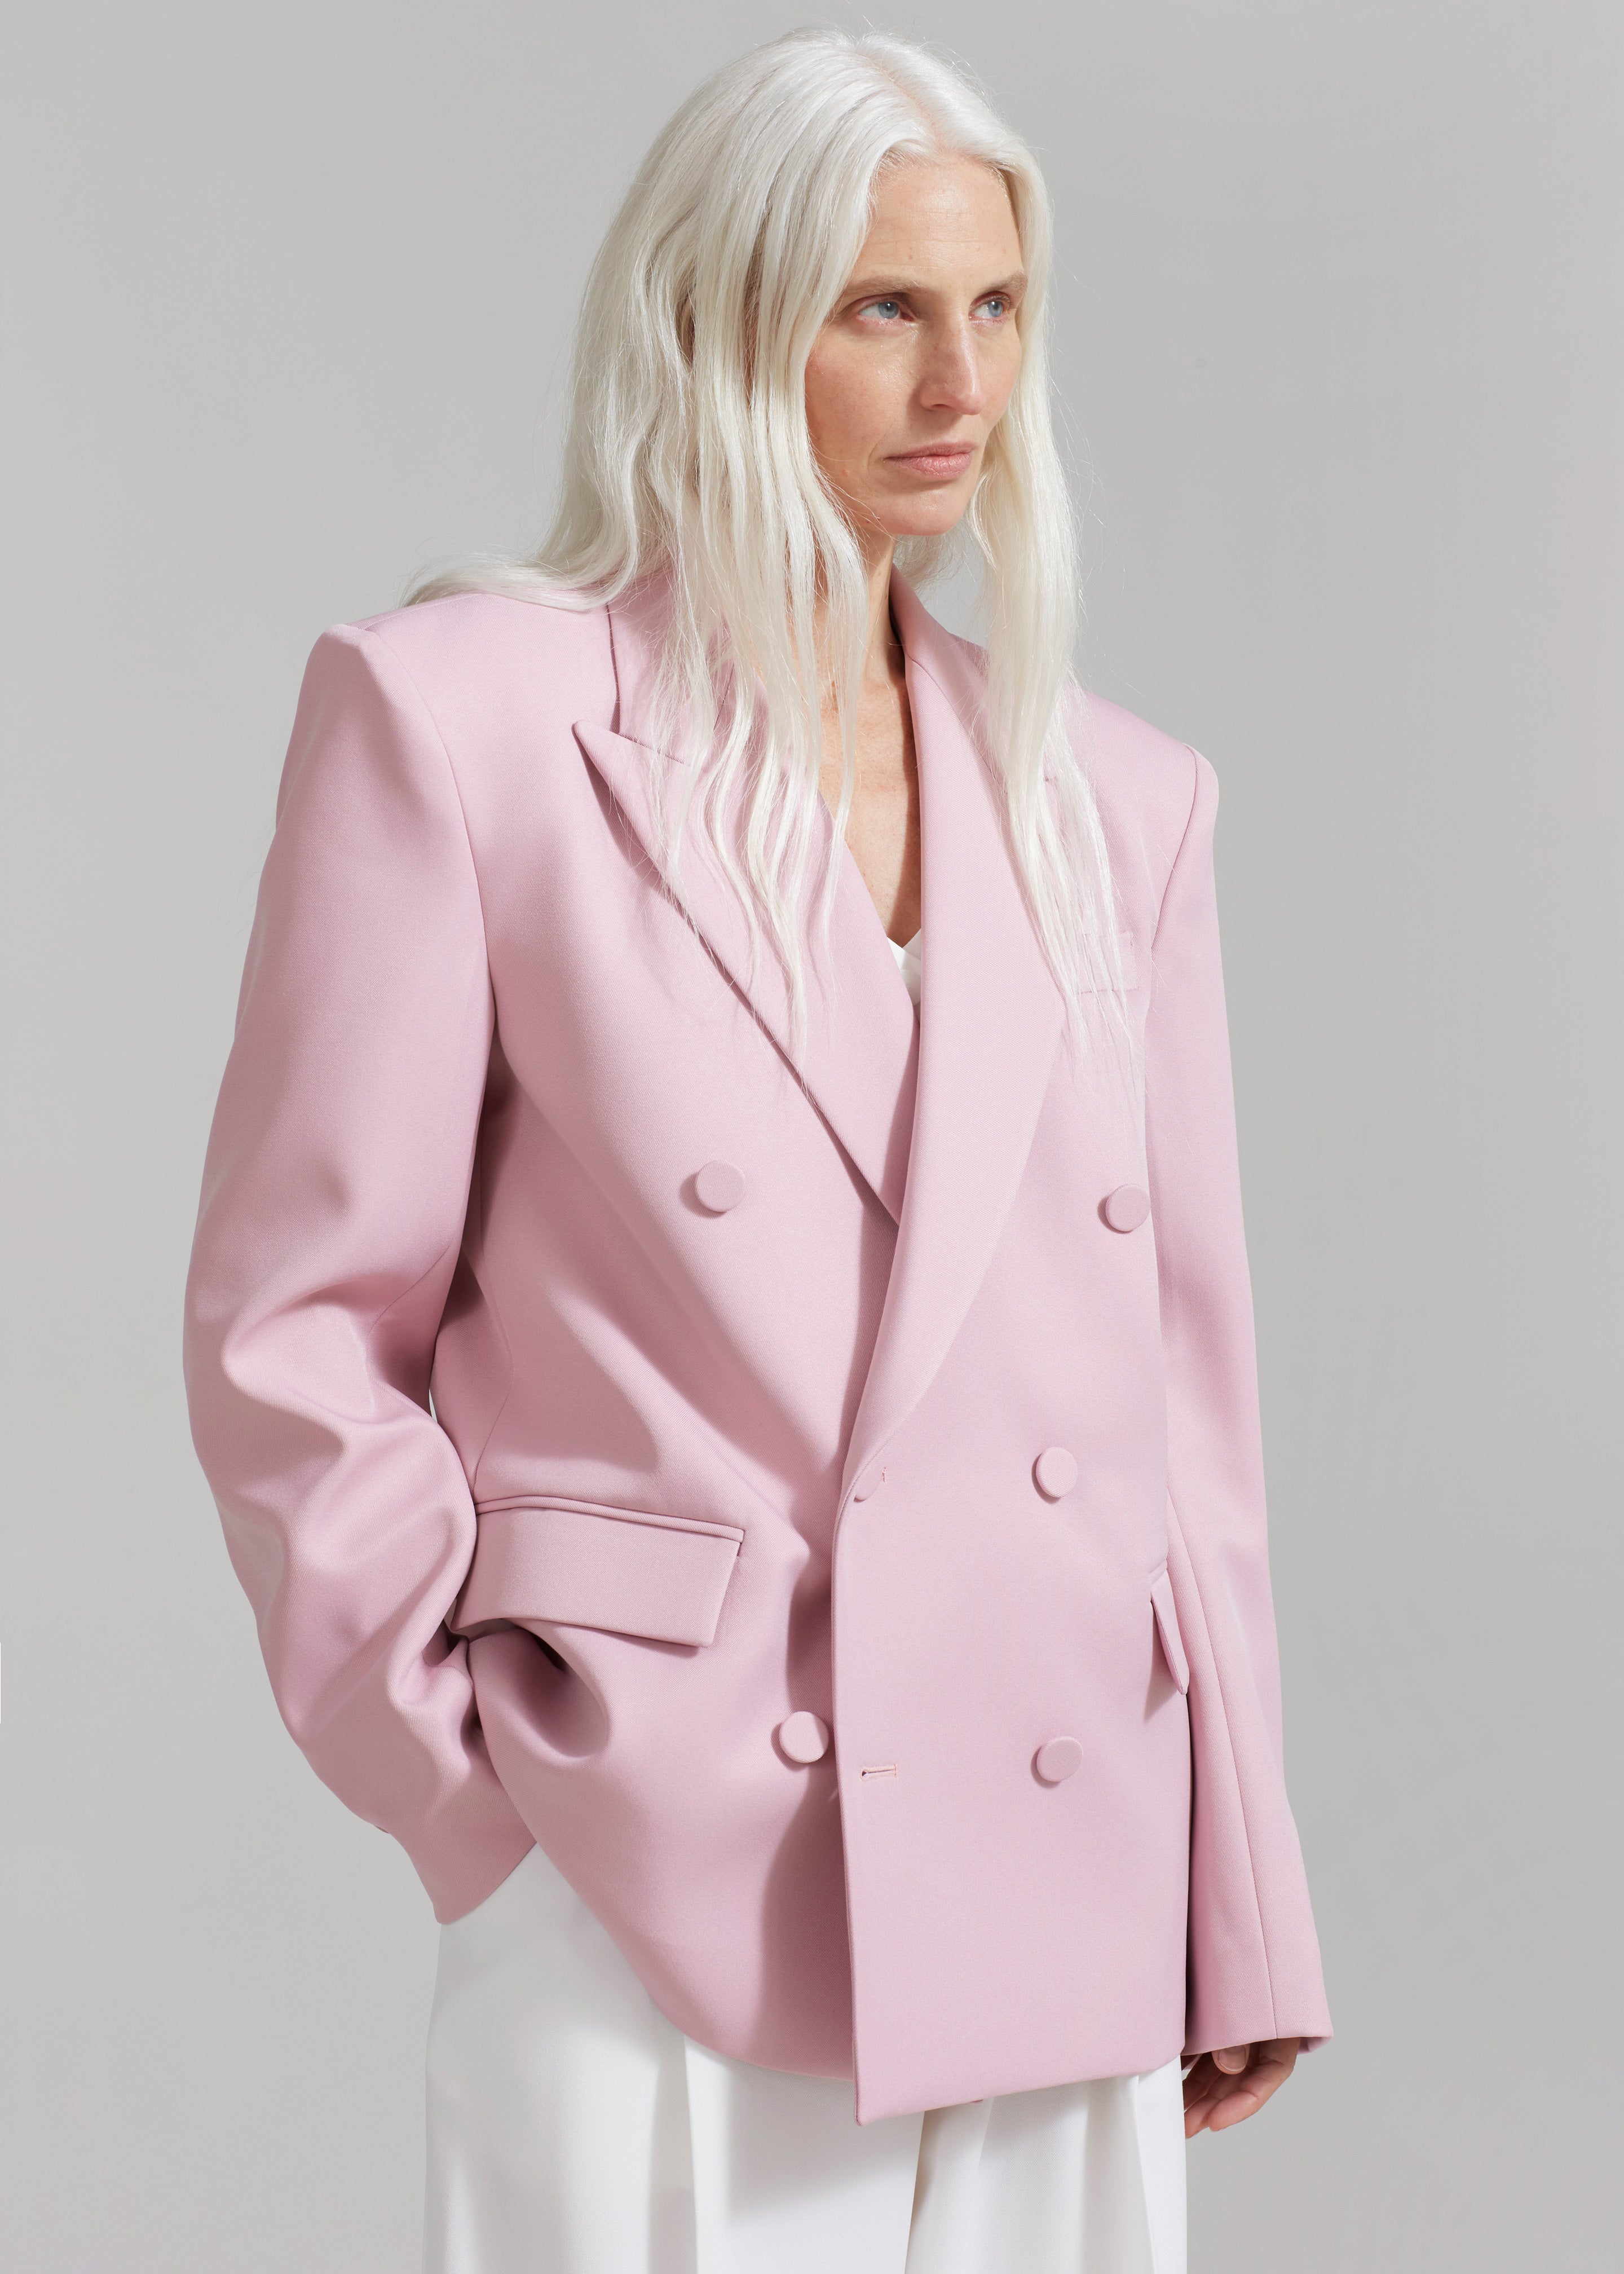 Zia Covered Buttons Blazer - Pink - 6